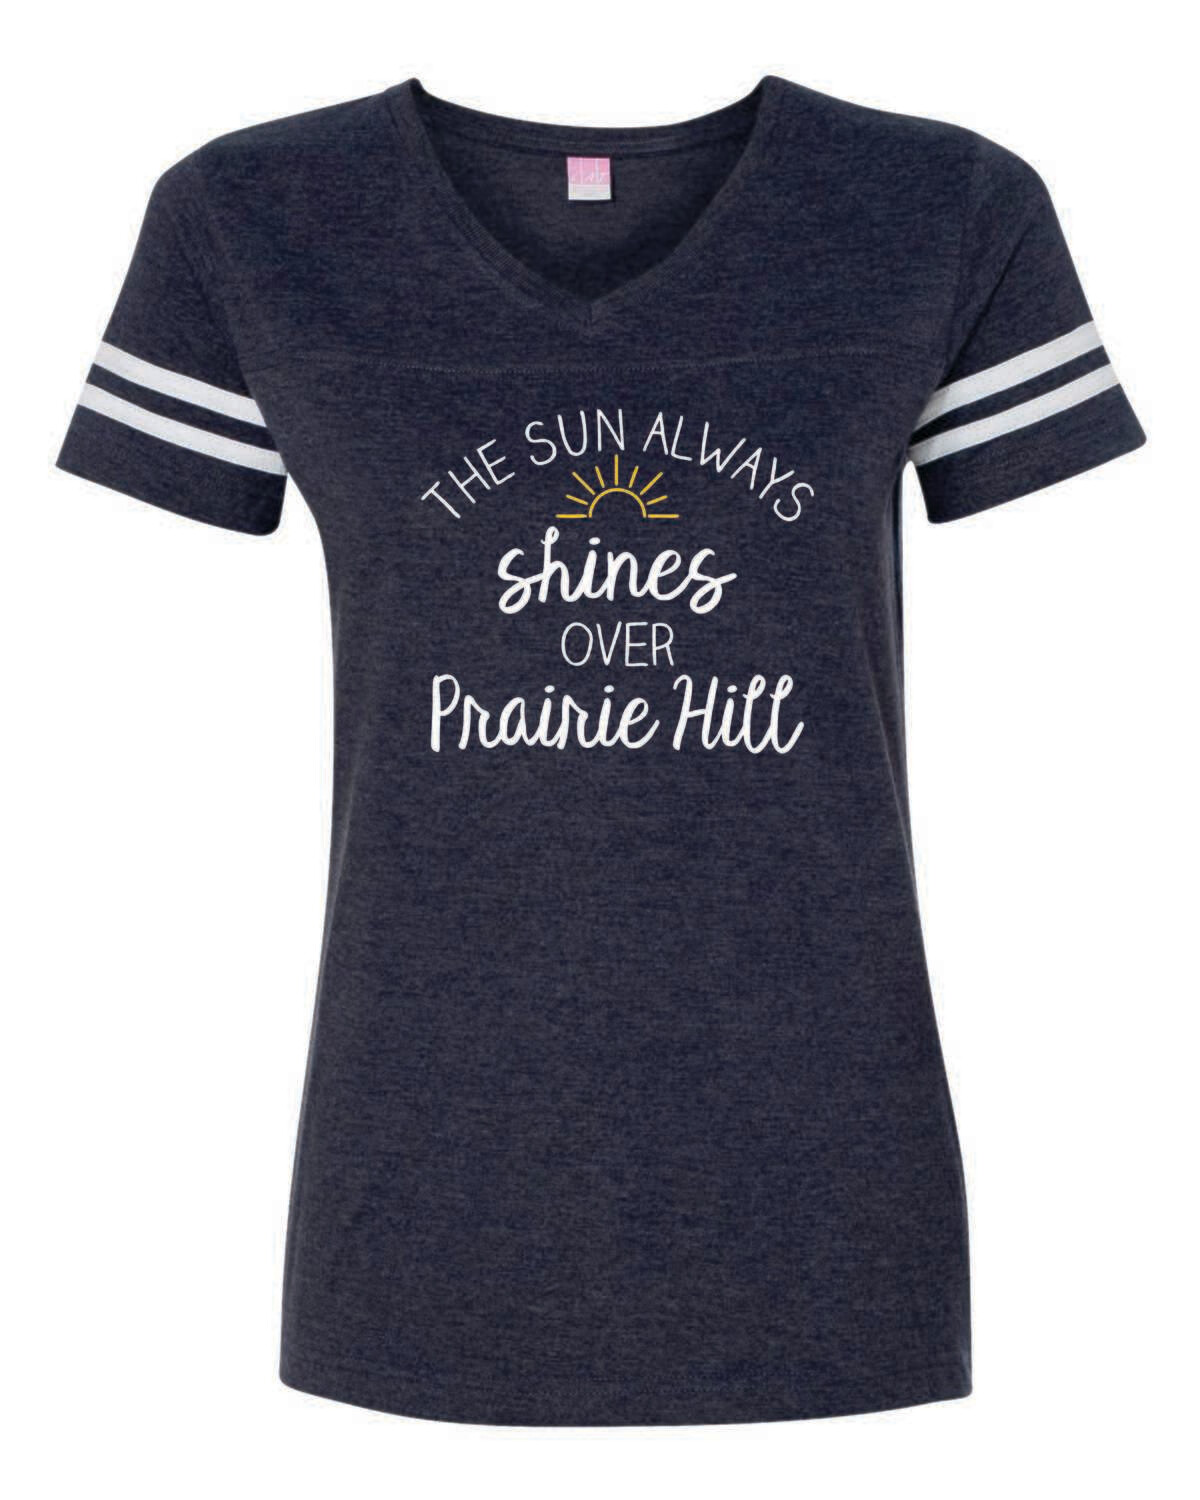 THE SUN ALWAYS SHINES OVER PRAIRIE HILL WOMEN&#39;S FOOTBALL V-NECK TEE, 2 COLOR OPTIONS